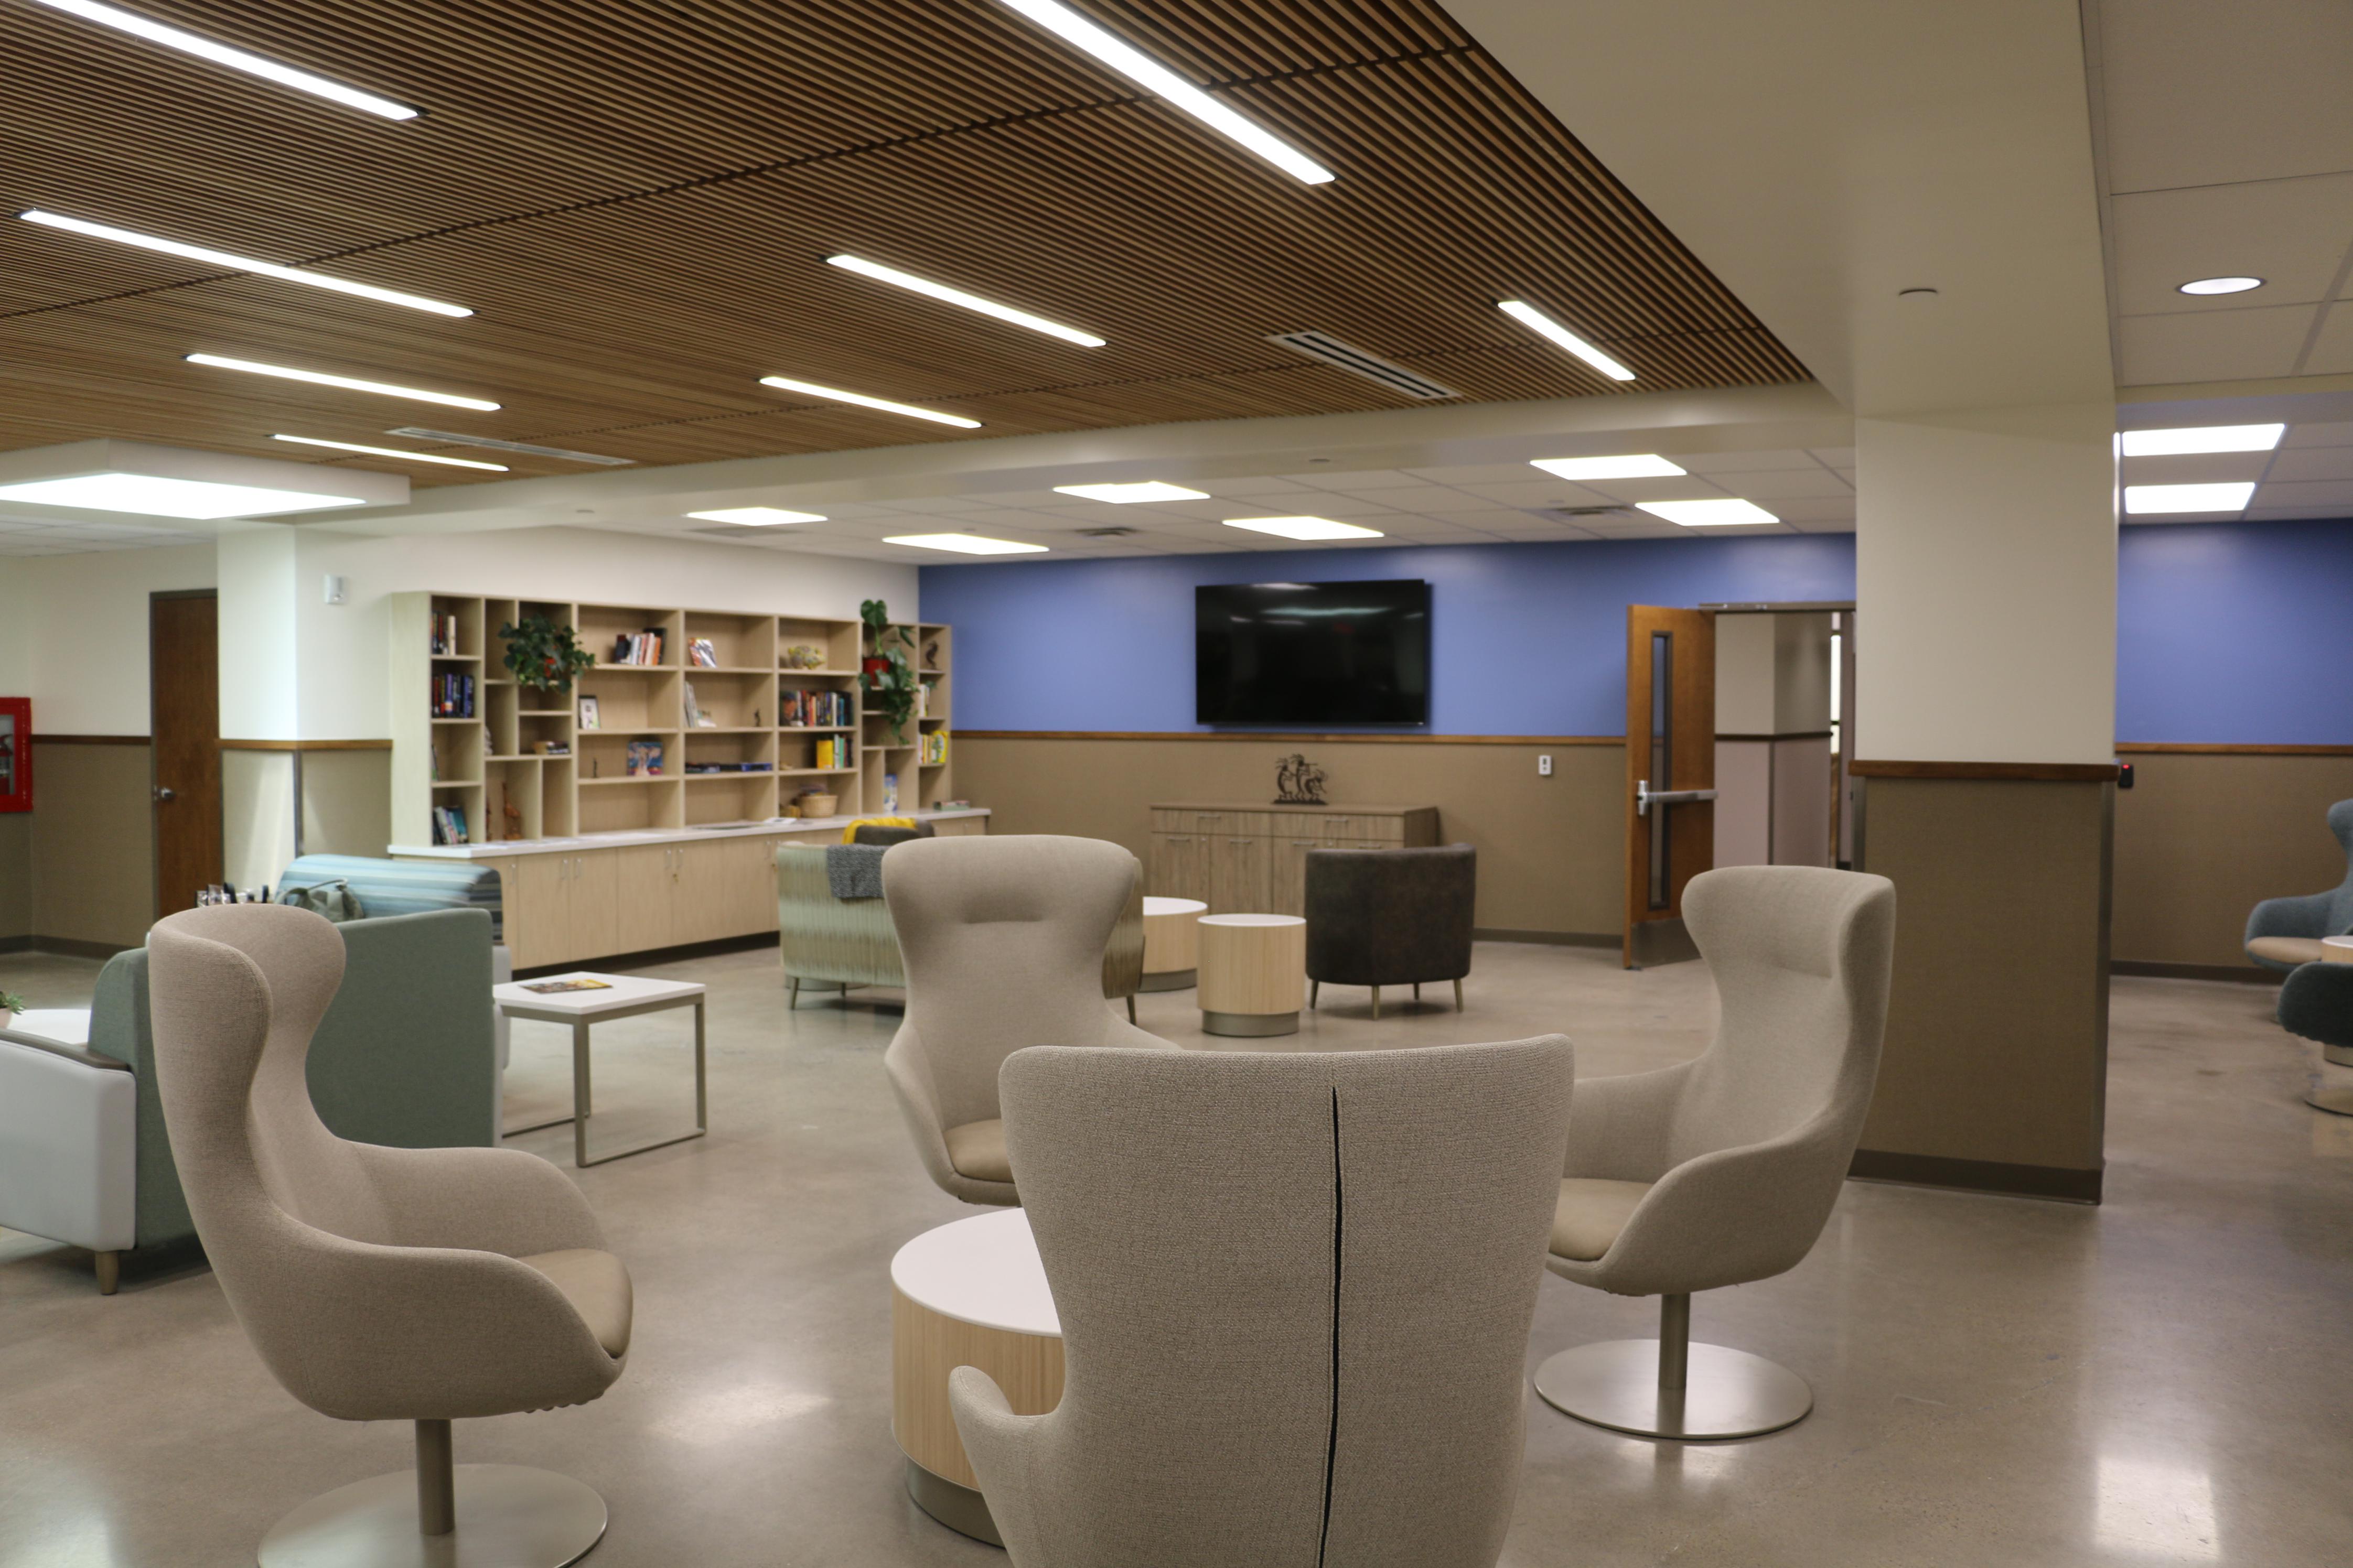 The common room of the Gateway Center with multiple seating areas and a television